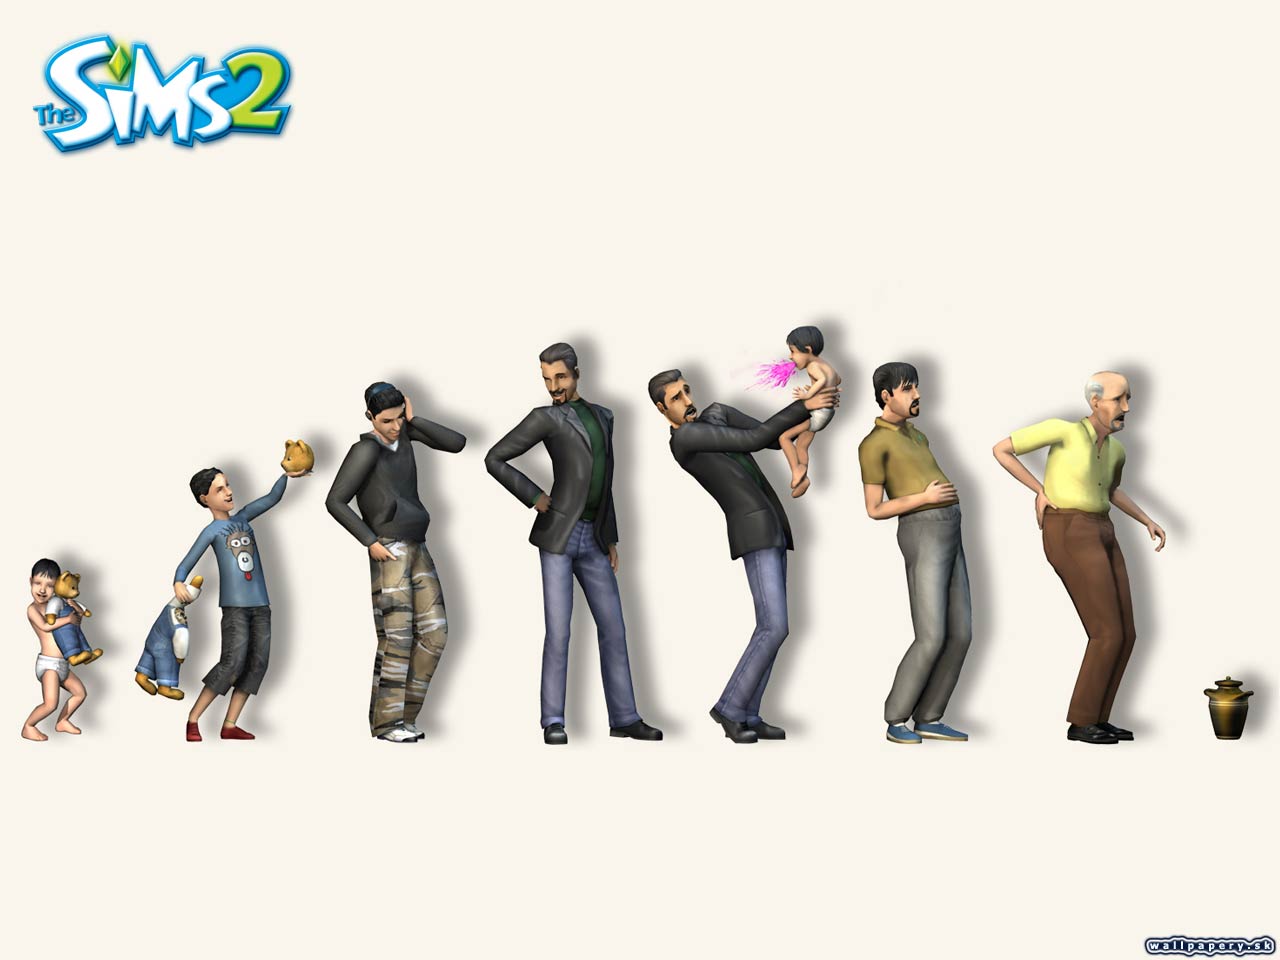 The Sims 2 - wallpaper 4